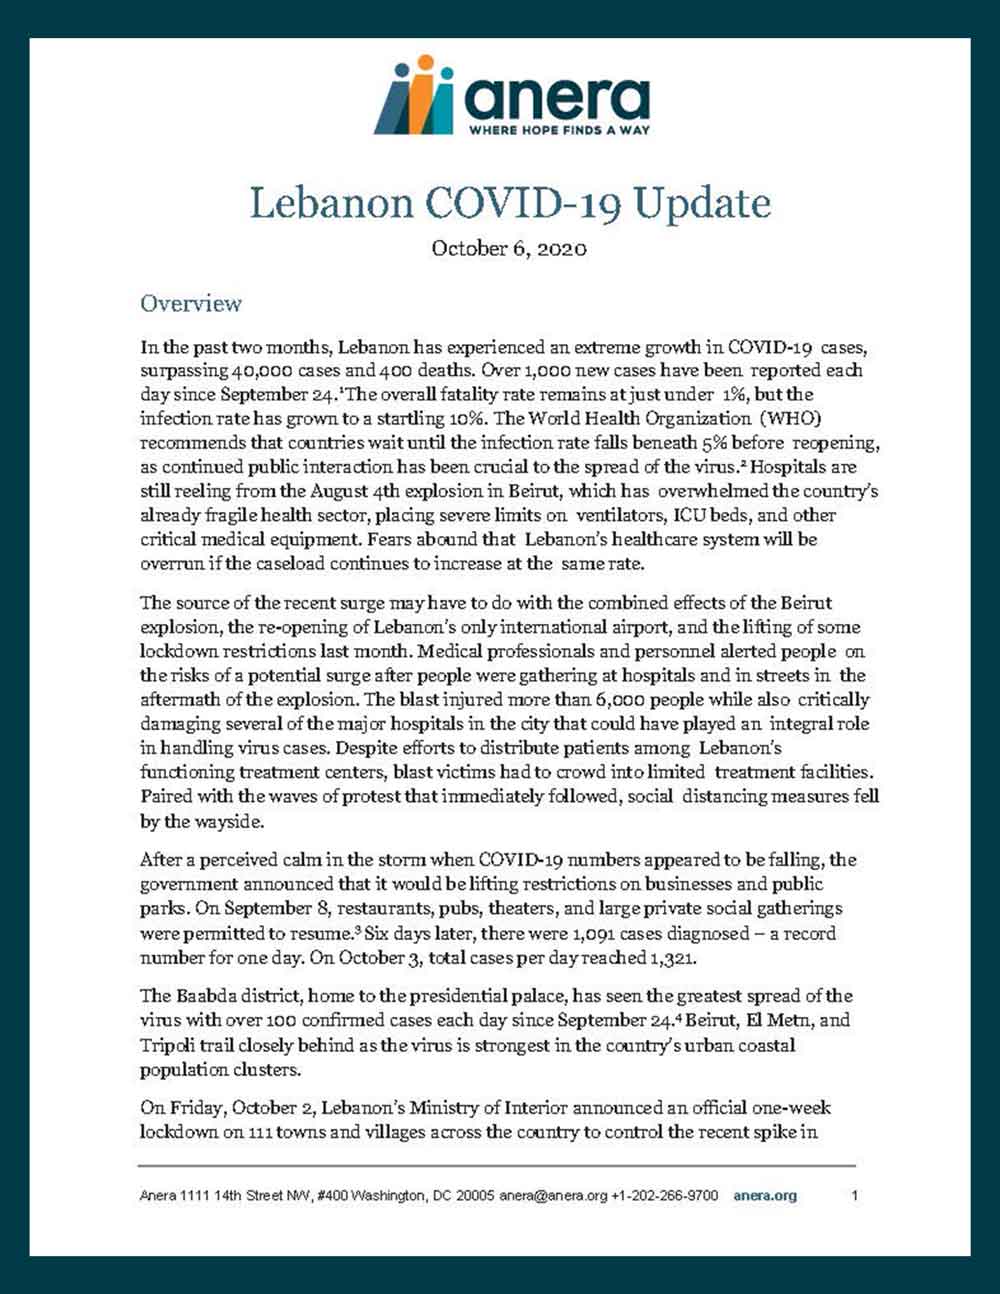 Anera's October situation report on COVID-19 in Lebanon.